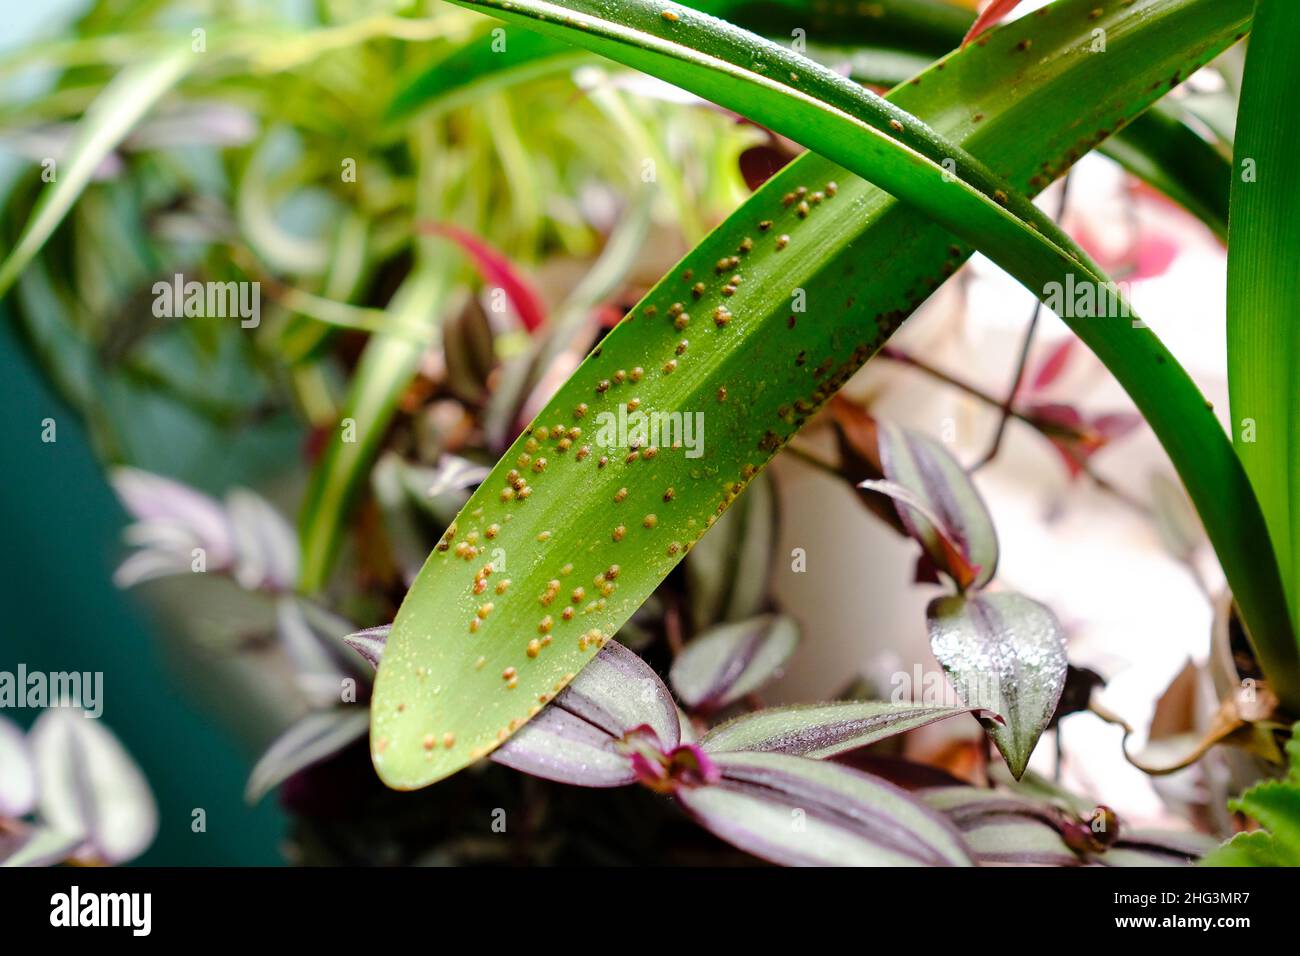 Plant pests. Diaspididae on long leaves of a houseplant. Stock Photo